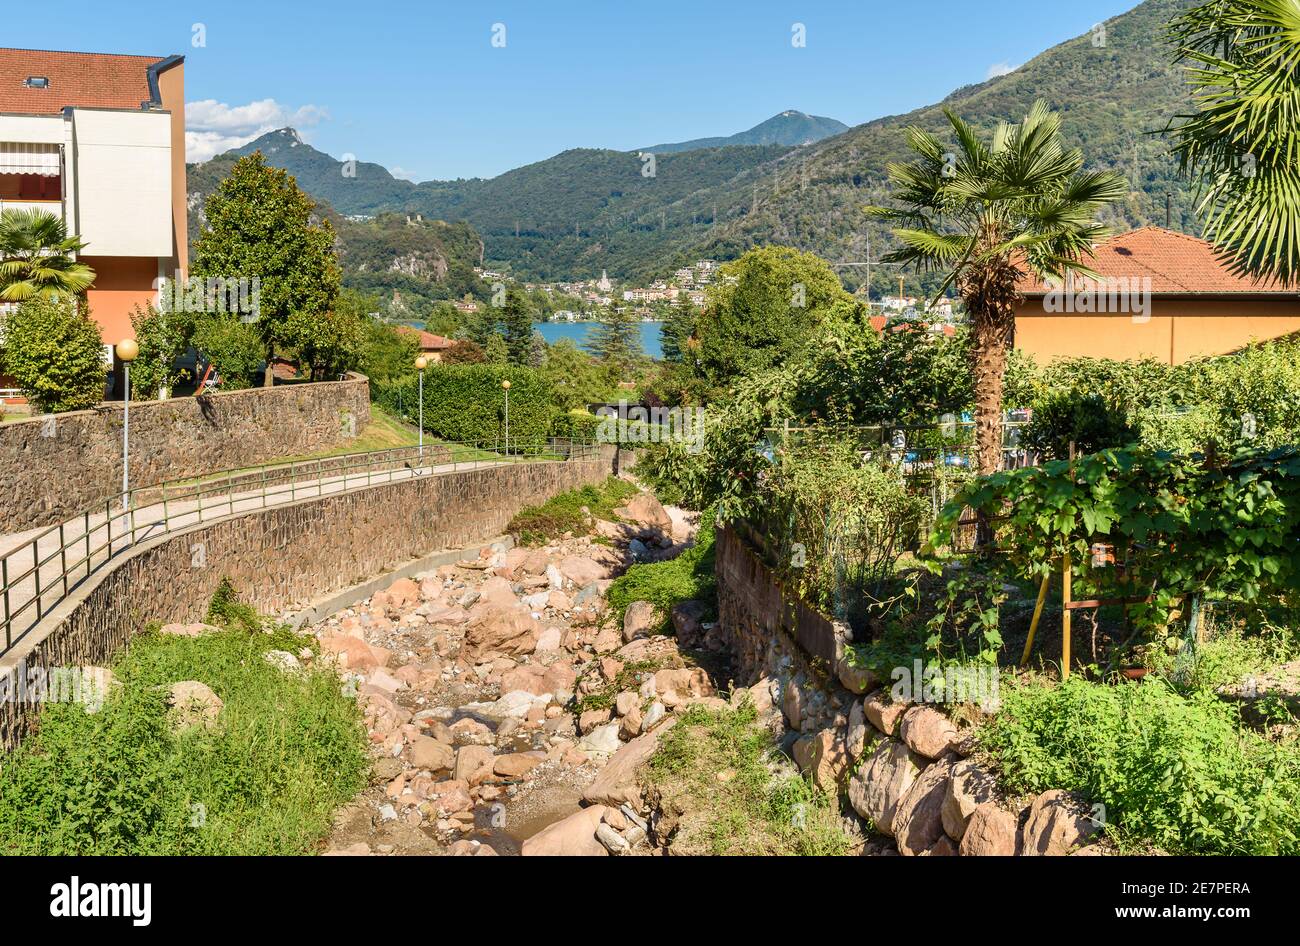 Brusimpiano, a small village on the shore of lake Lugano in province of Varese, Lombardy, Italy Stock Photo